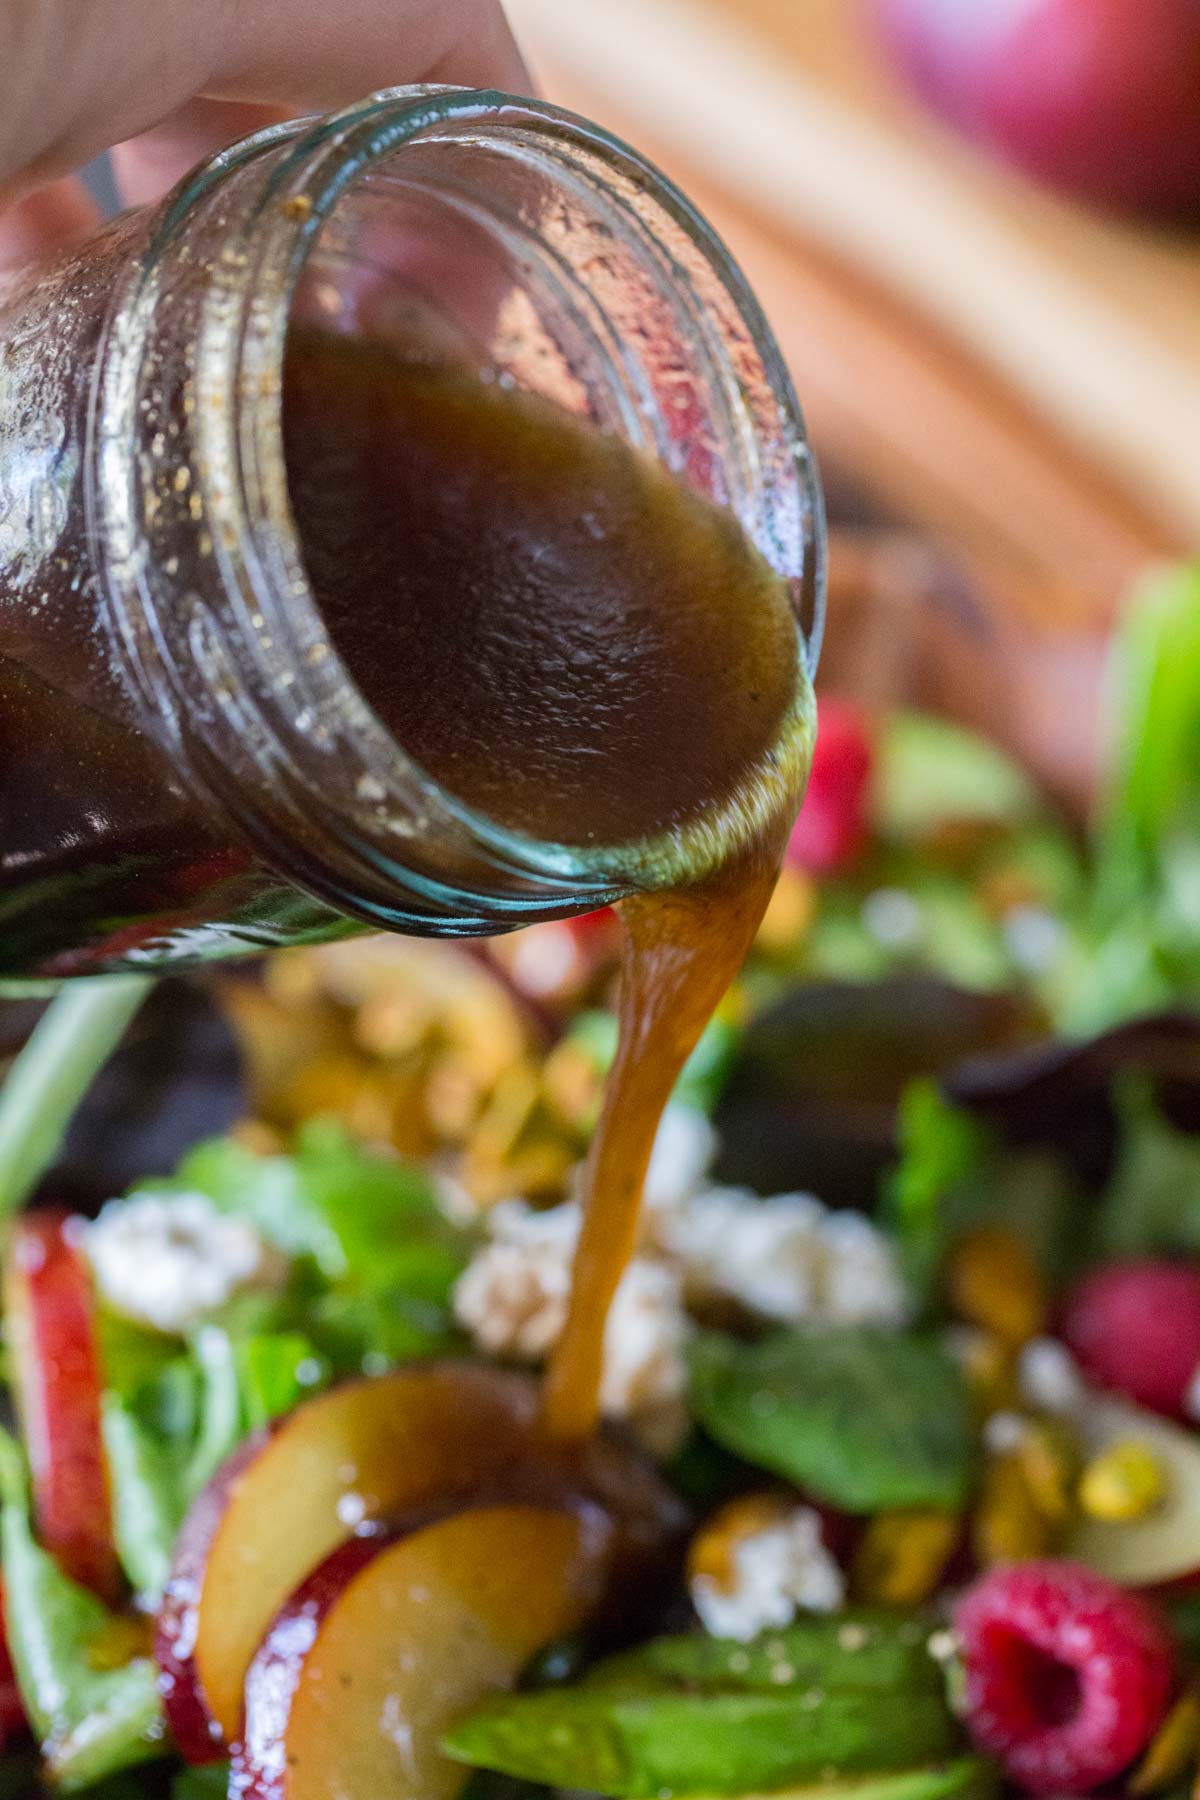 A glass jar of homemade balsamic vinaigrette being poured on top of the Summer Fruited Salad with Goat Cheese and Pistachios.